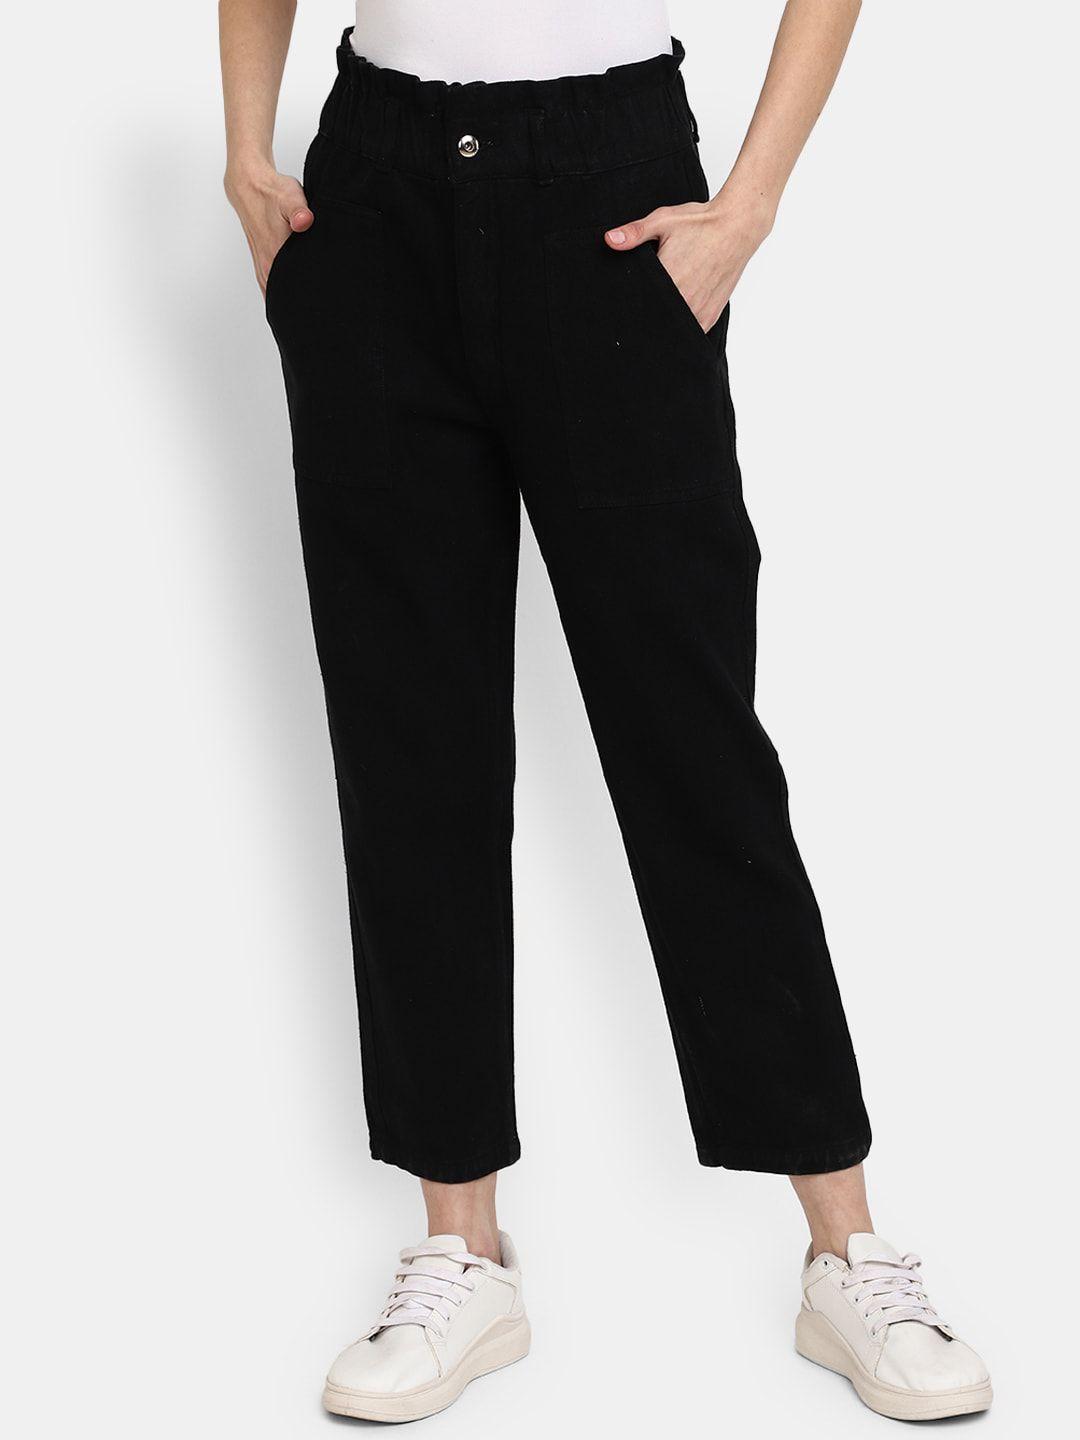 v-mart-women-high-rise-cropped-cotton-joggers